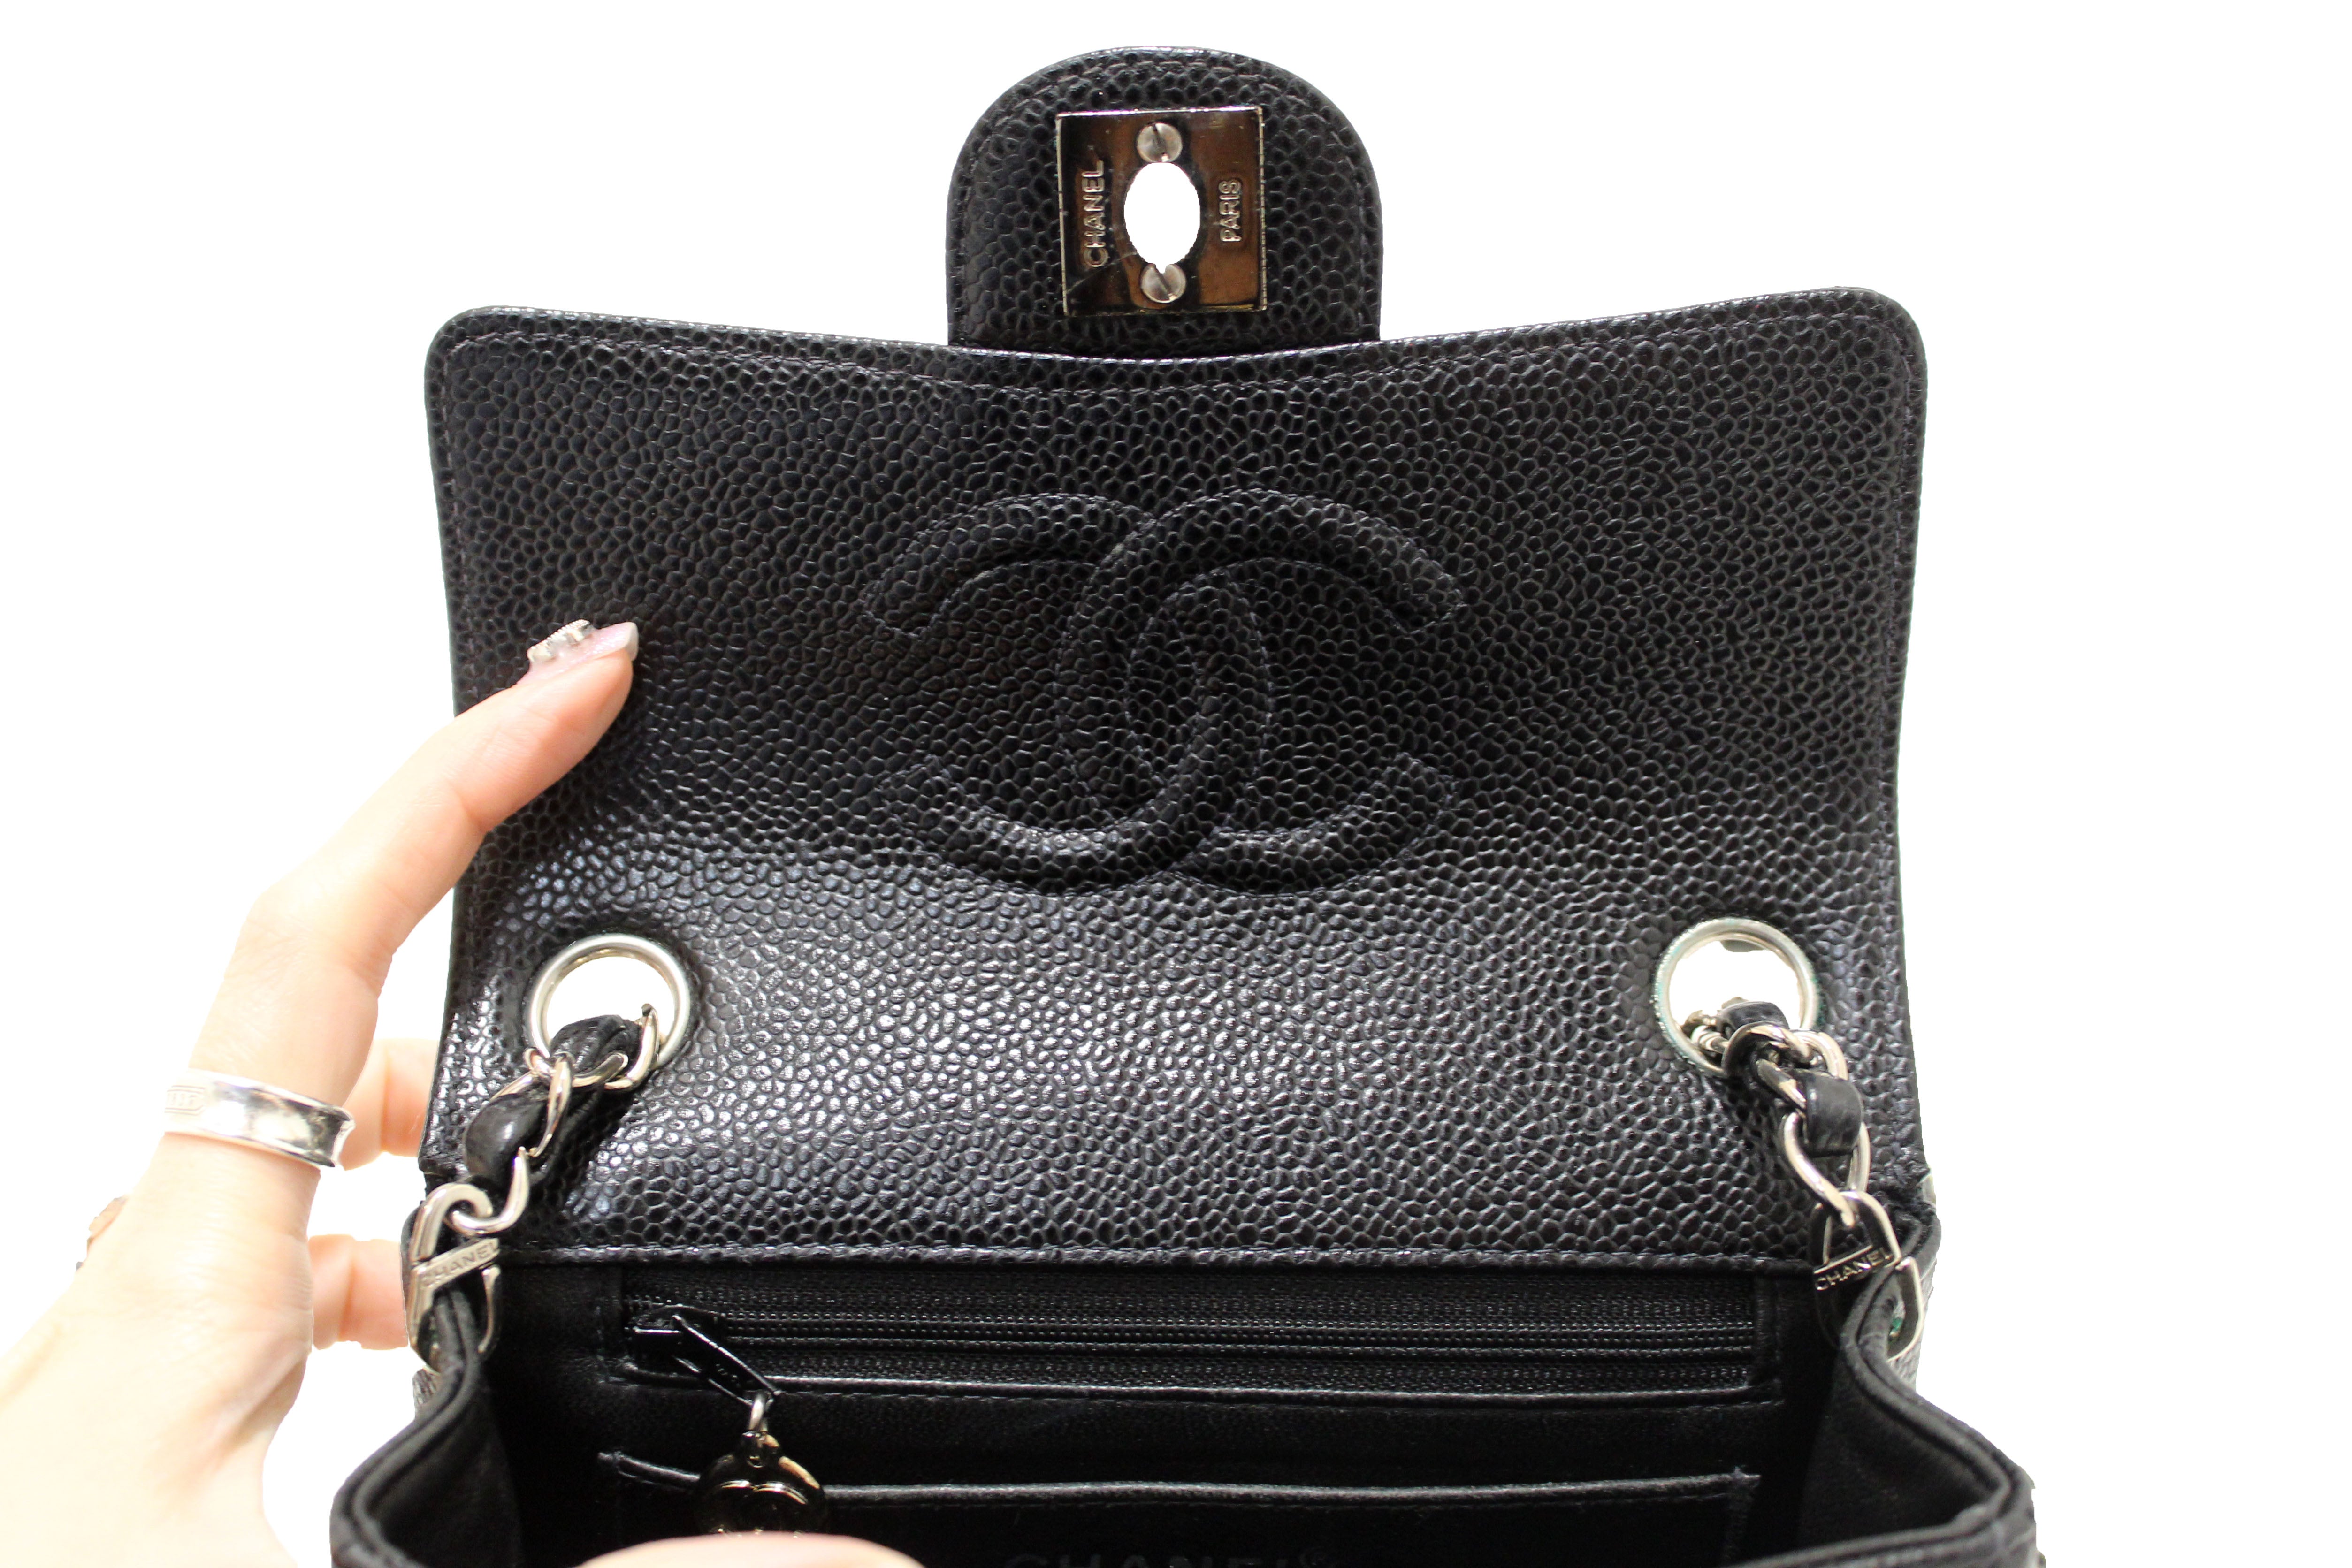 Authentic Chanel Black Quilted Caviar Leather Square Mini Classic Flap Bag